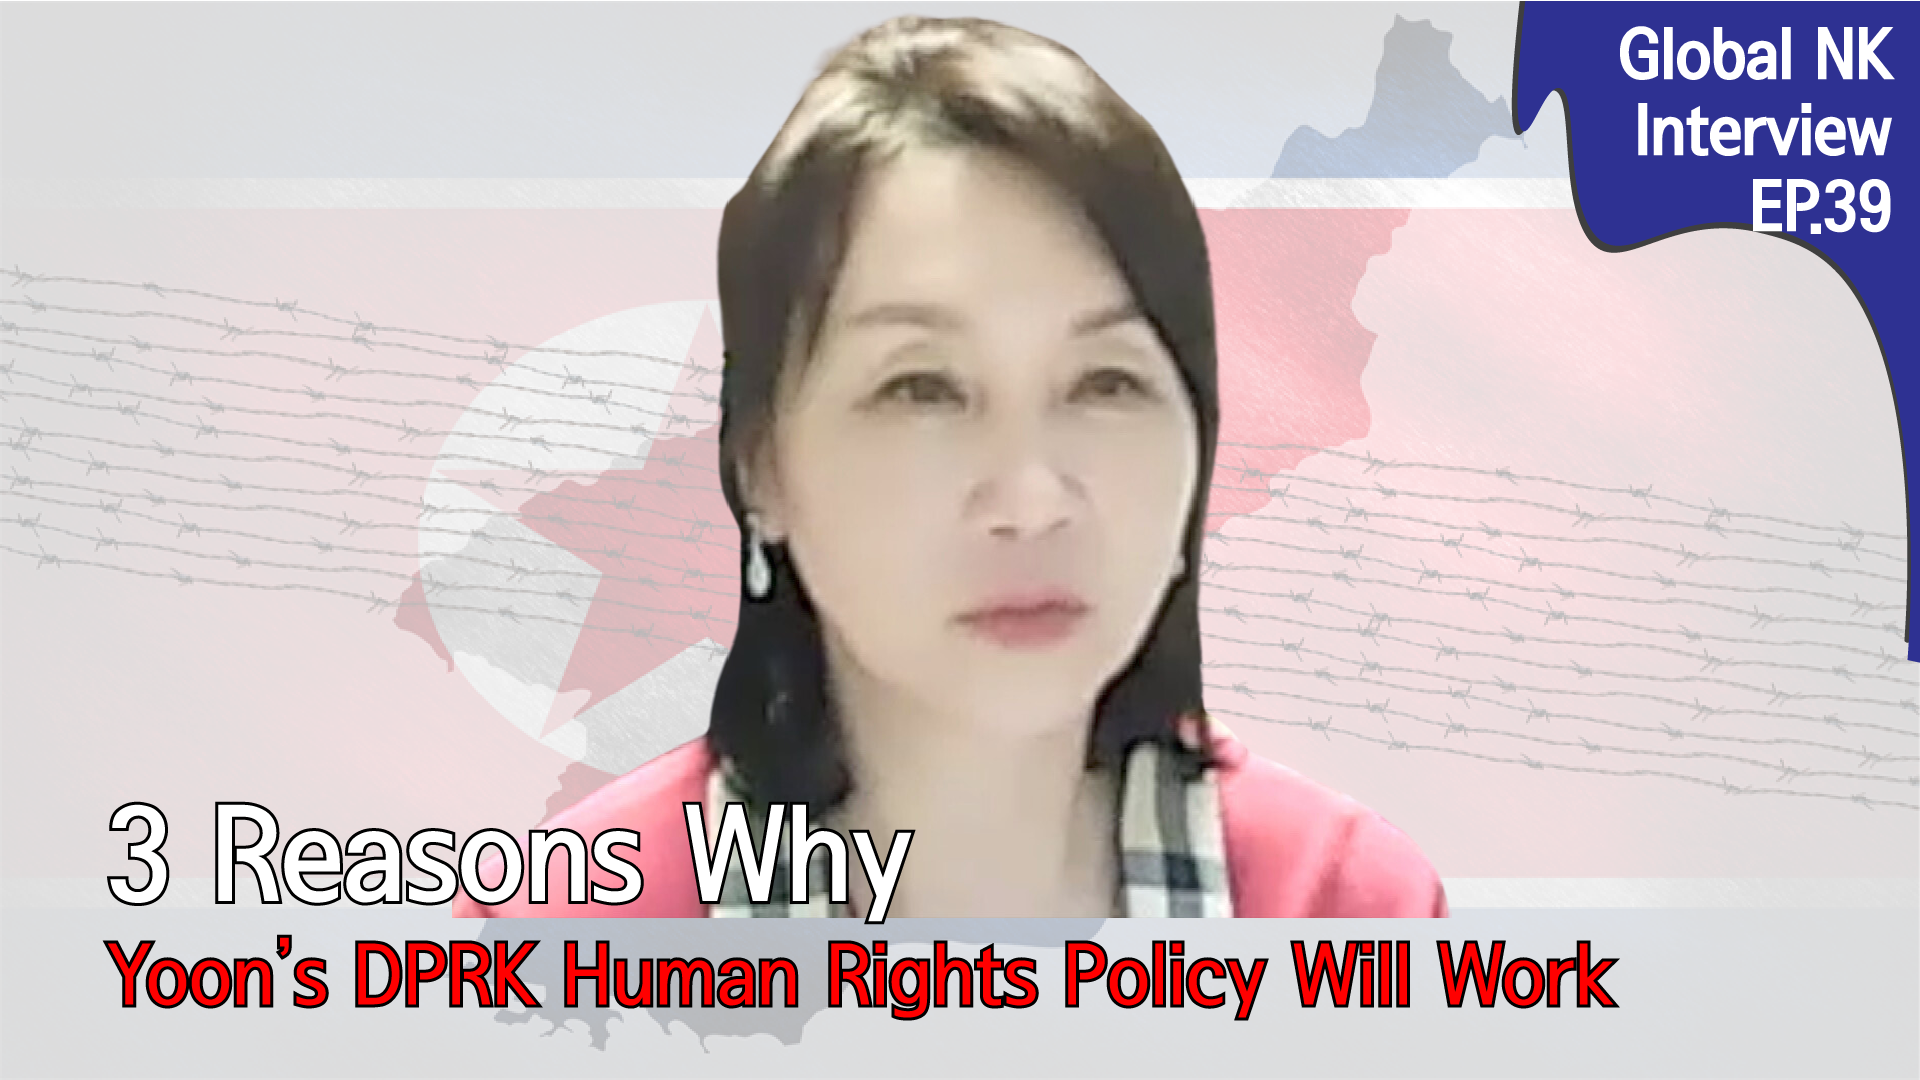 Ep. 39 Shin-wha Lee: Understanding Seoul's DPRK Policy - Interconnection between Human Rights and Denuclearization